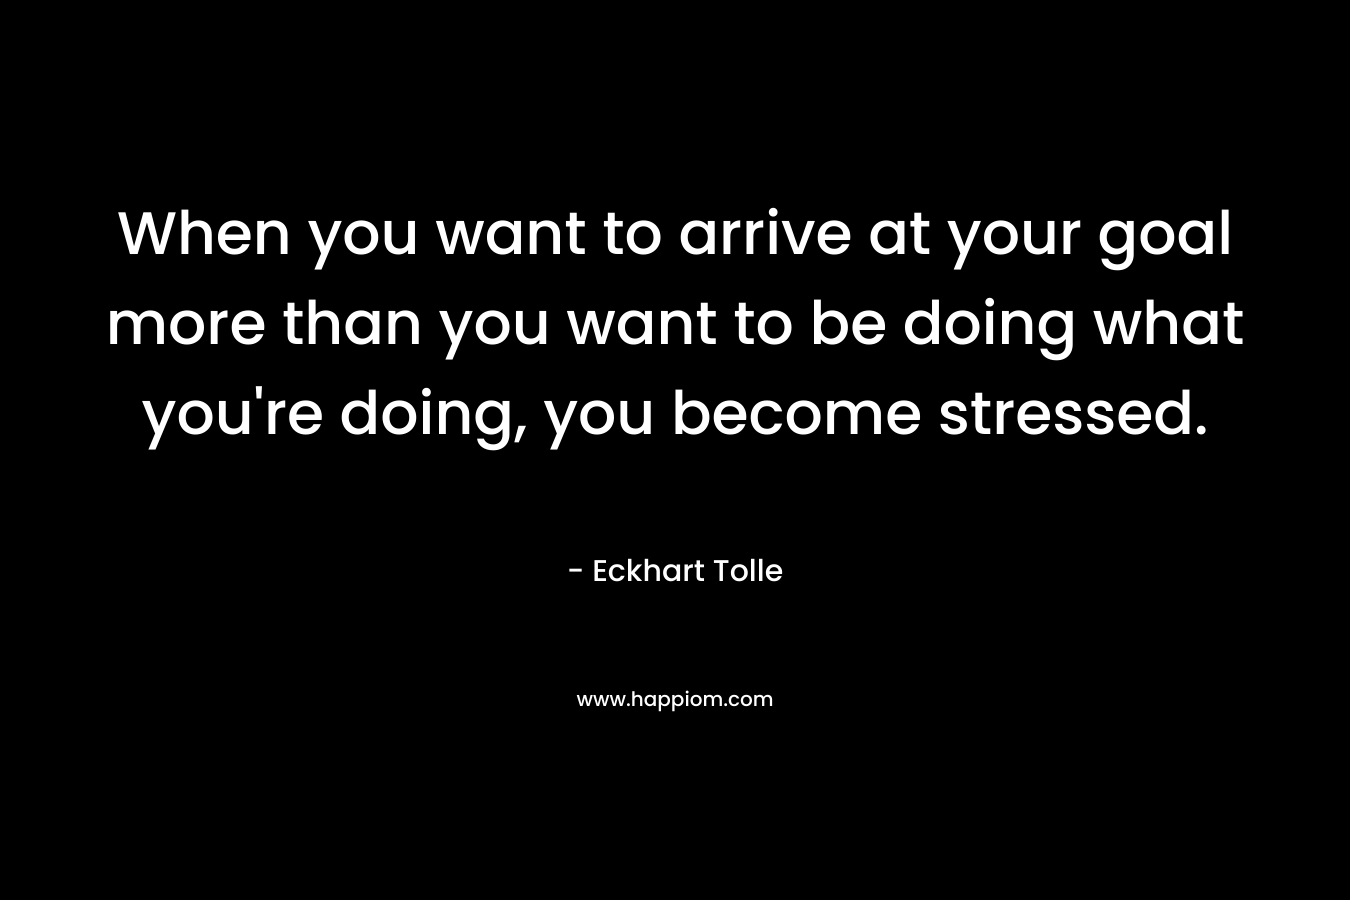 When you want to arrive at your goal more than you want to be doing what you're doing, you become stressed.